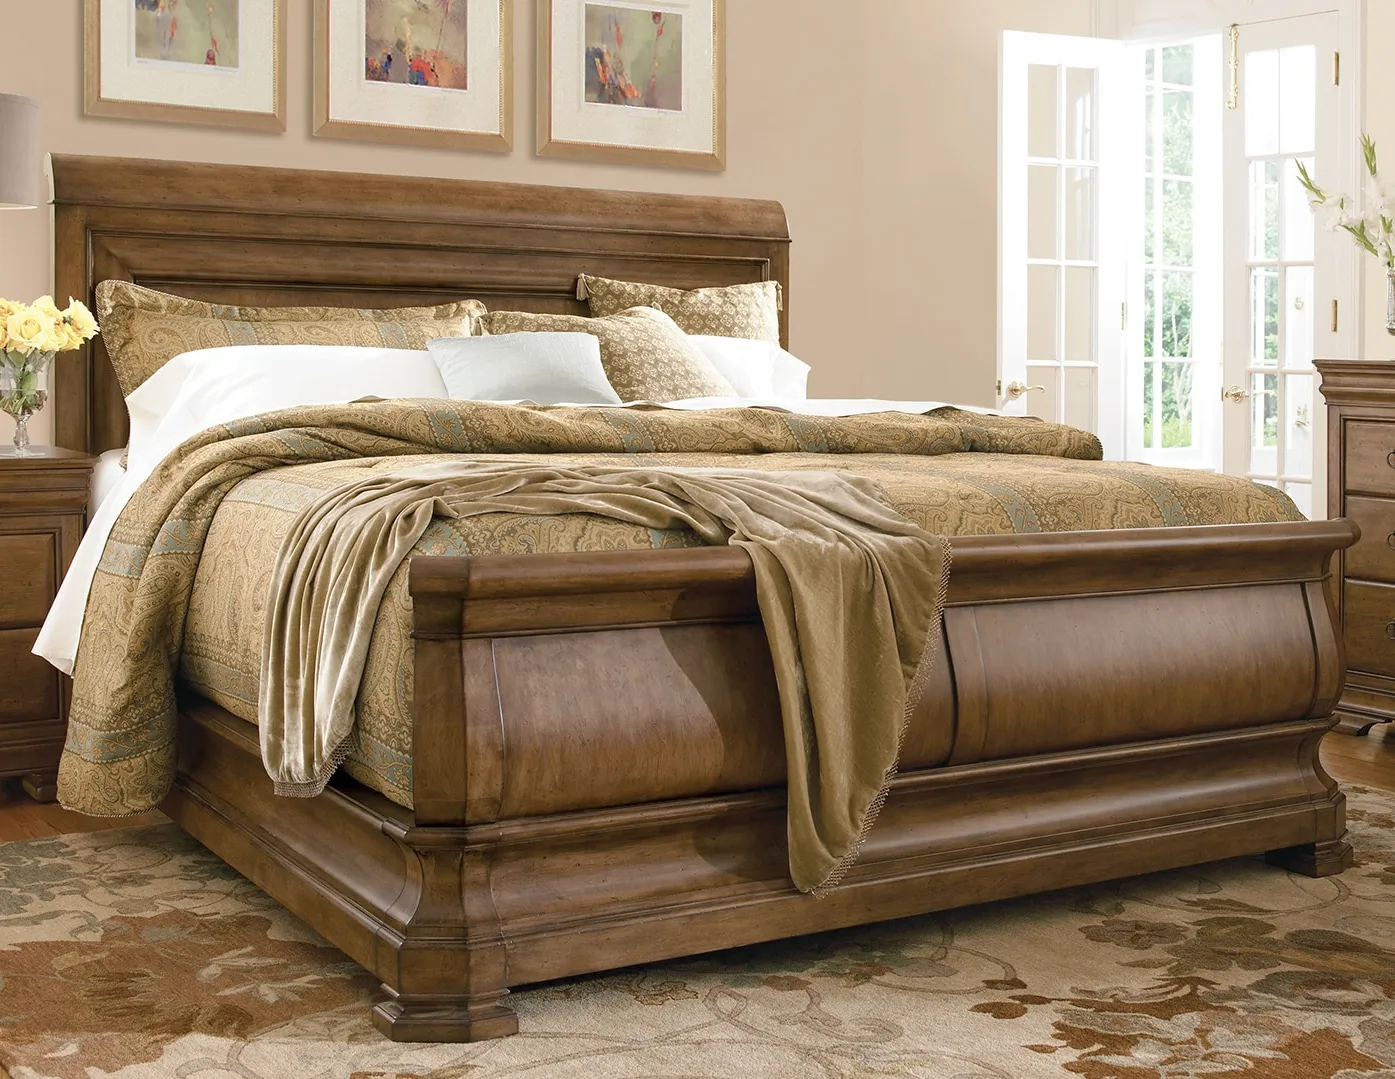 New Lou Queen Sleigh Bed